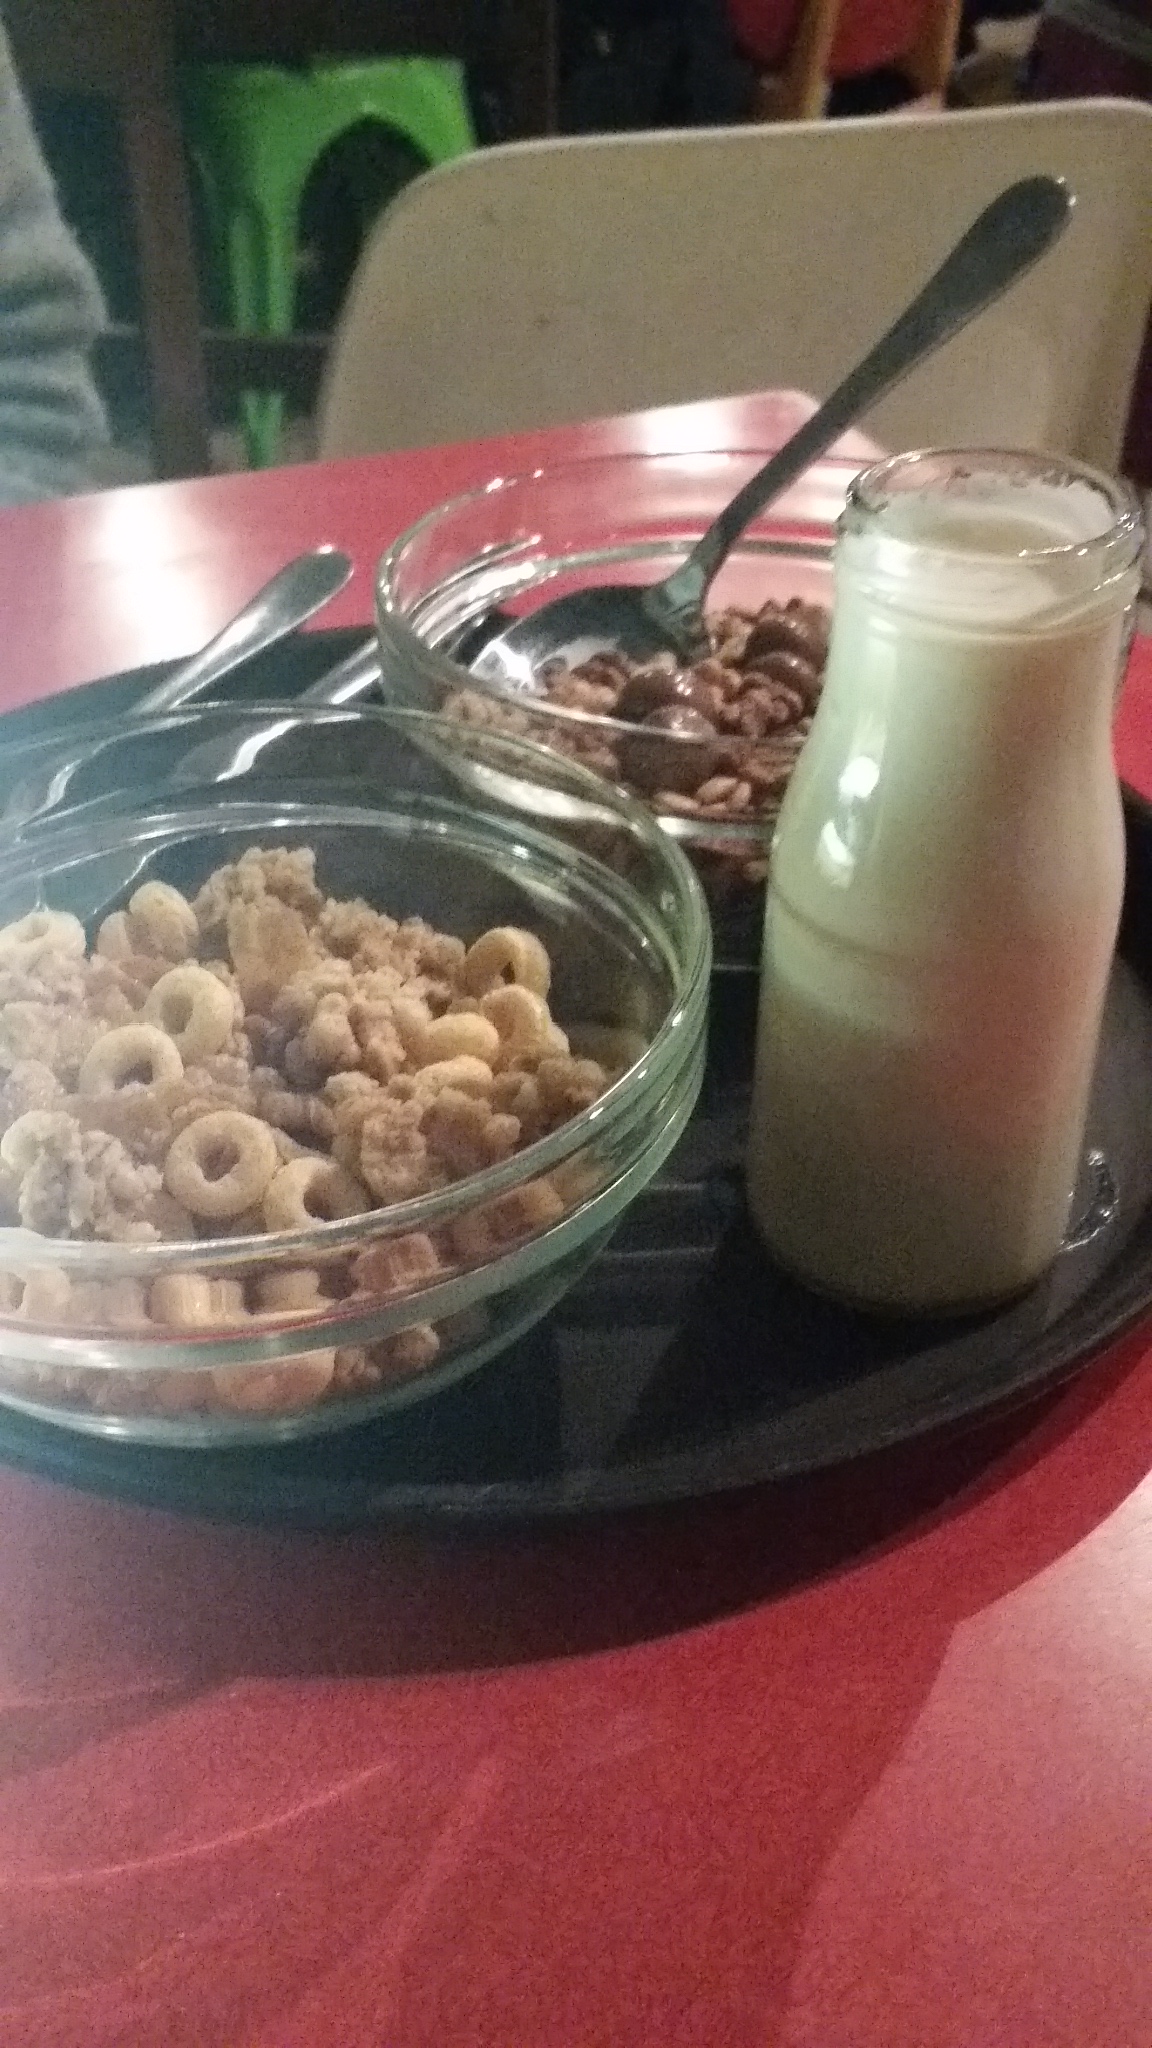 Eat cereal for Valentines at the Cereal Killer Cafe